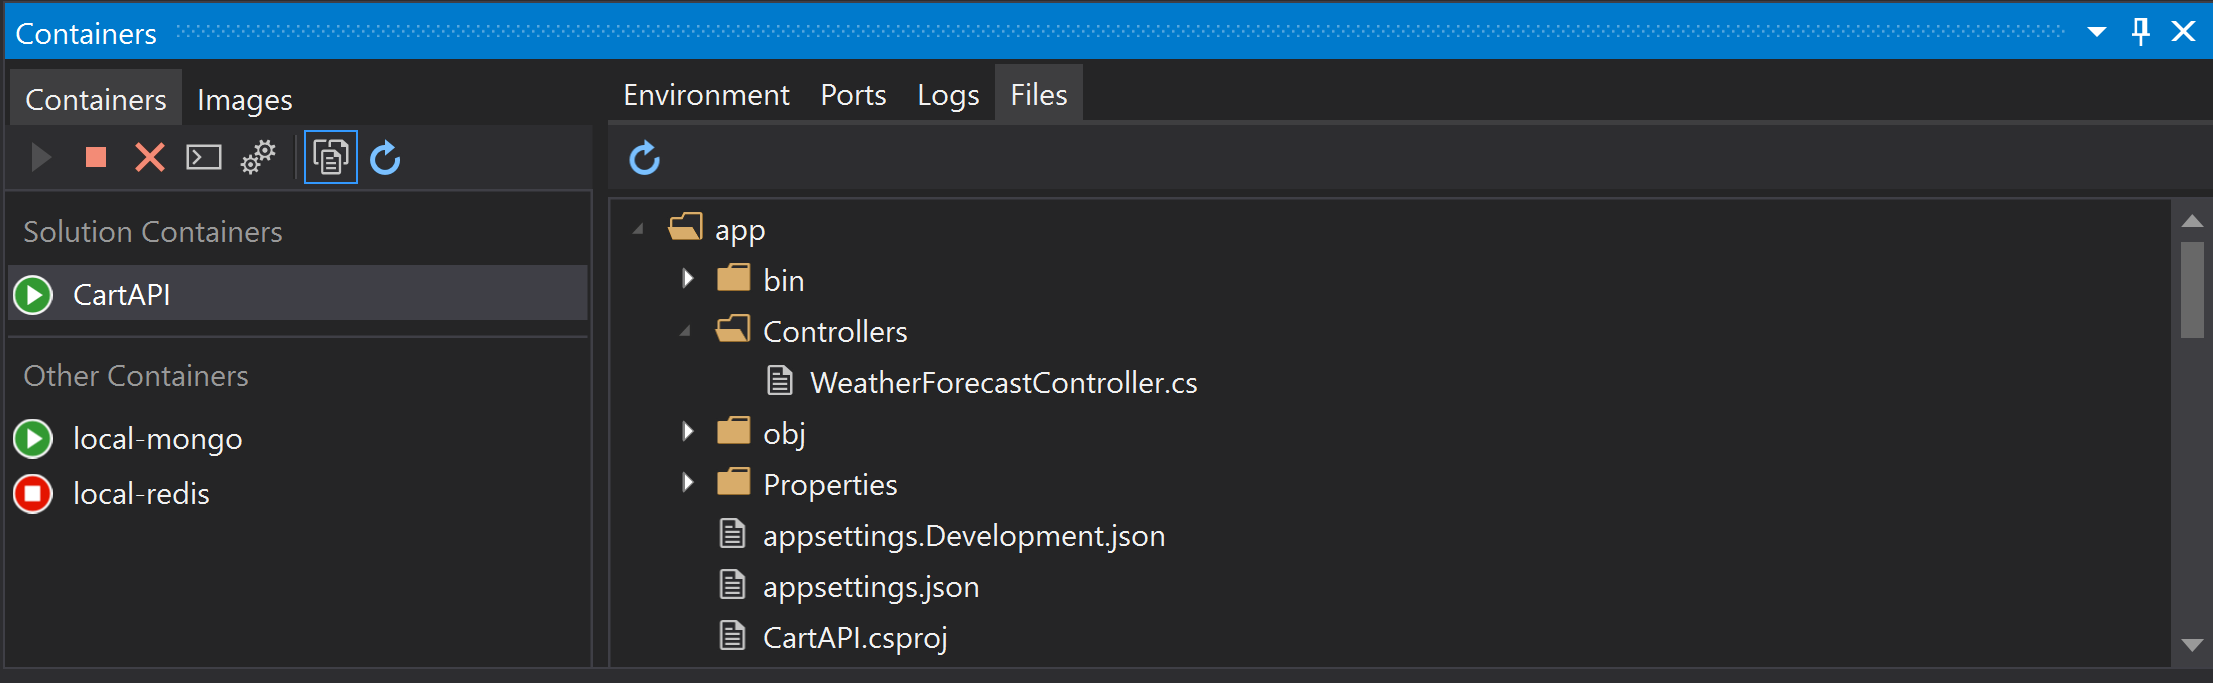 You can list, inspect, stop, start, and remove containers through the containers tool window.